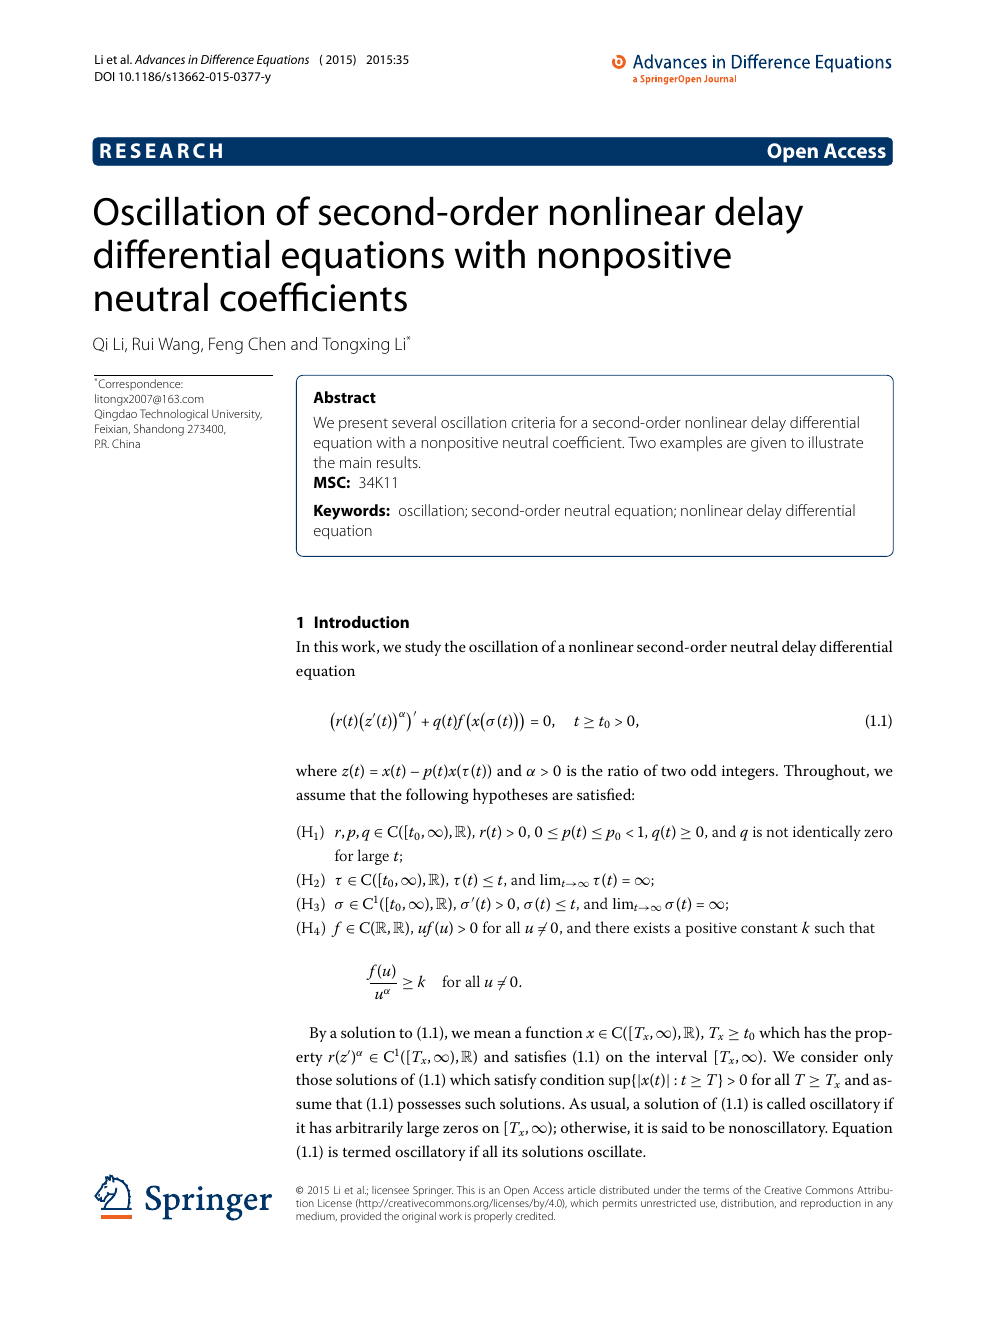 Oscillation Of Second Order Nonlinear Delay Differential Equations With Nonpositive Neutral Coefficients Topic Of Research Paper In Mathematics Download Scholarly Article Pdf And Read For Free On Cyberleninka Open Science Hub